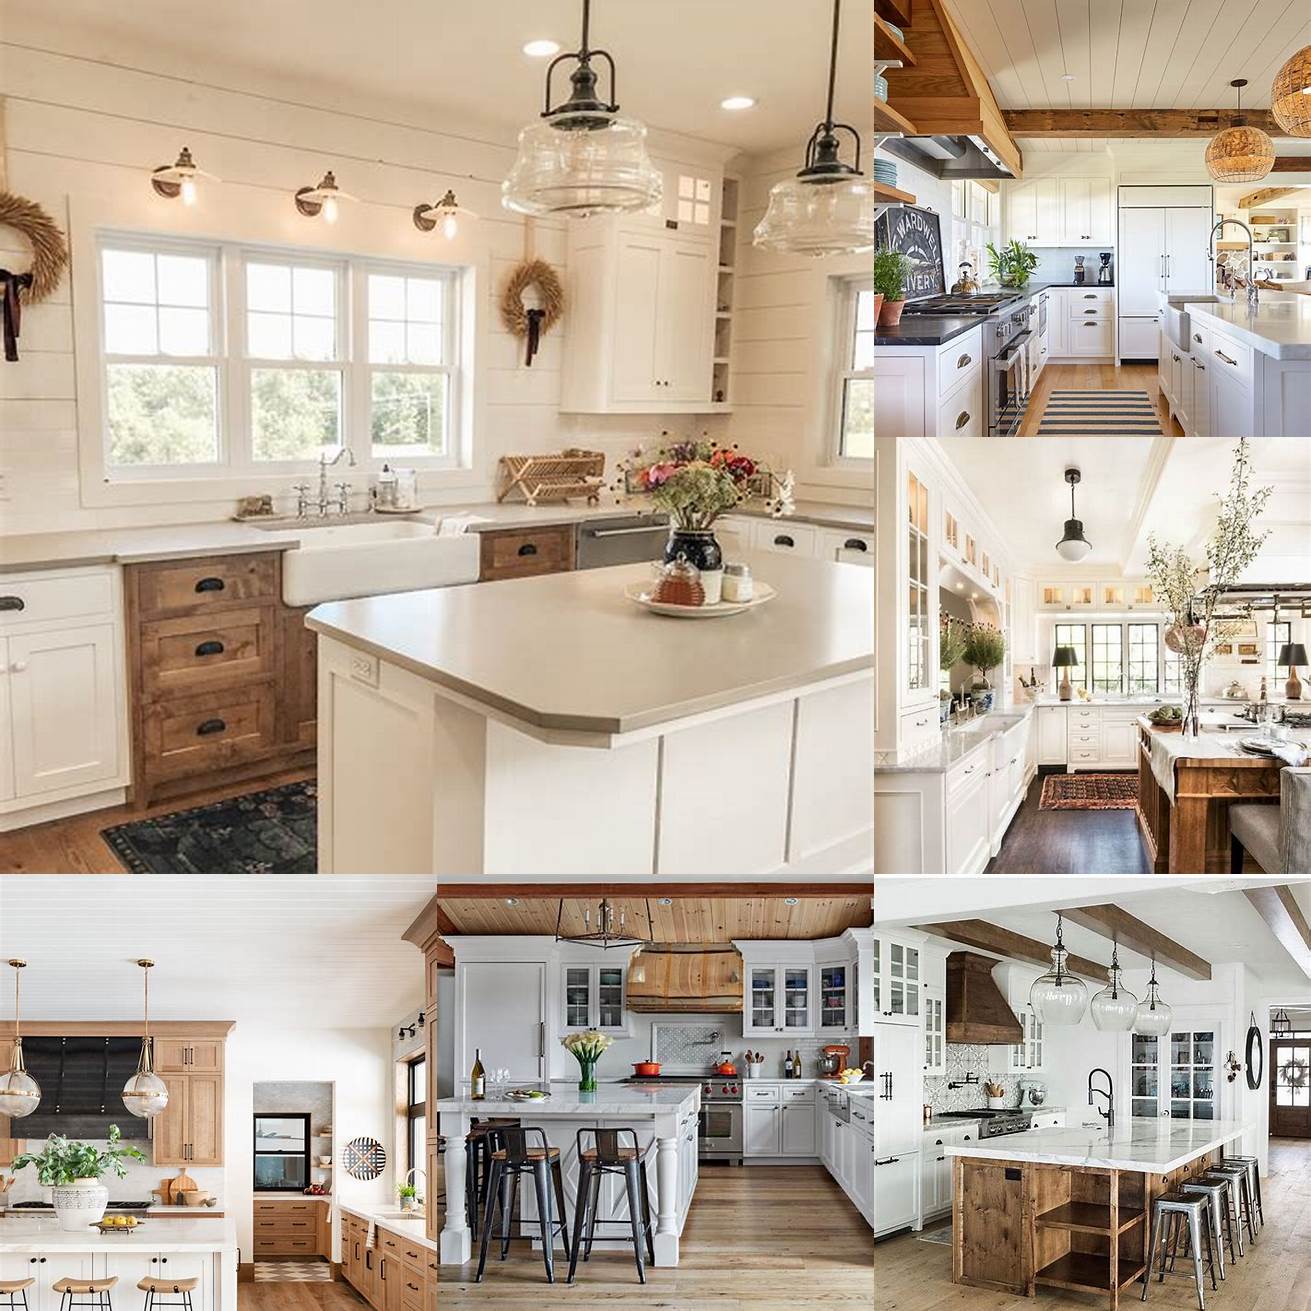 White farmhouse kitchen with wood accents